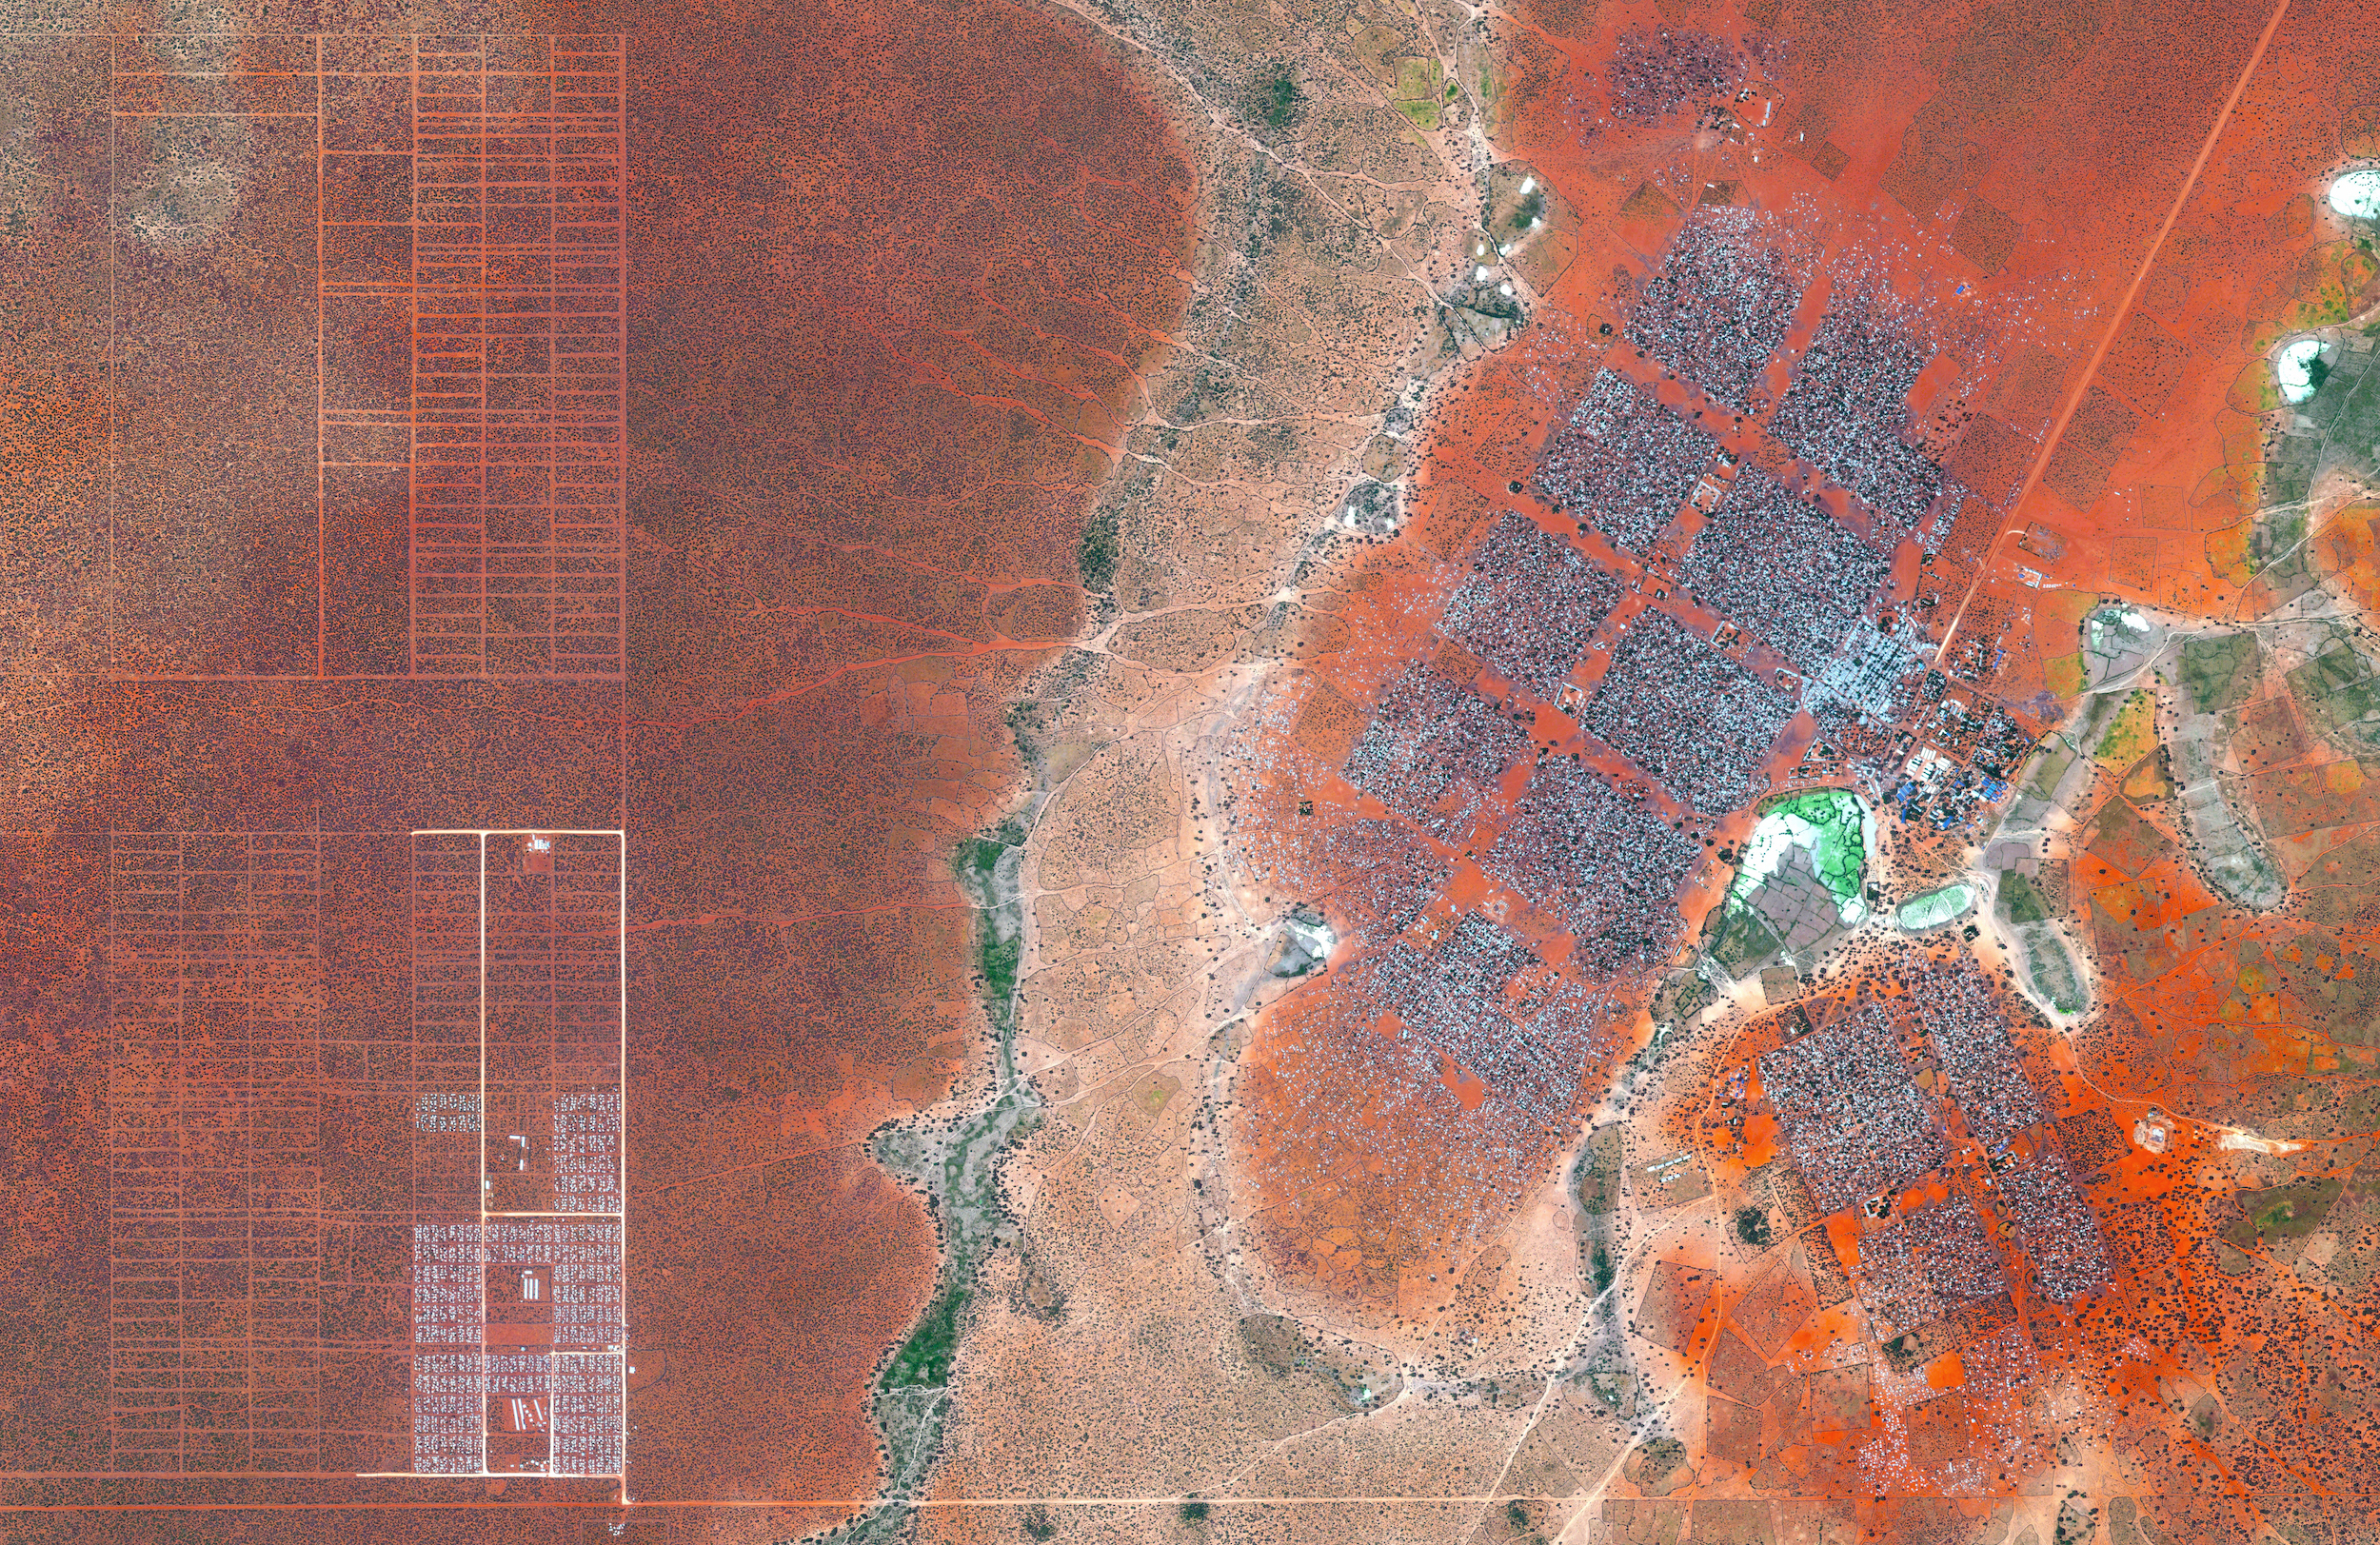 DADAAB REFUGEE CAMP –0·000434°, 40·364929° Reprinted with permission from Overview by Benjamin Grant, copyright (c) 2016. Images (c) 2016 by DigitalGlobe, Inc. Published by Amphoto Books, a division of Penguin Random House, Inc. 